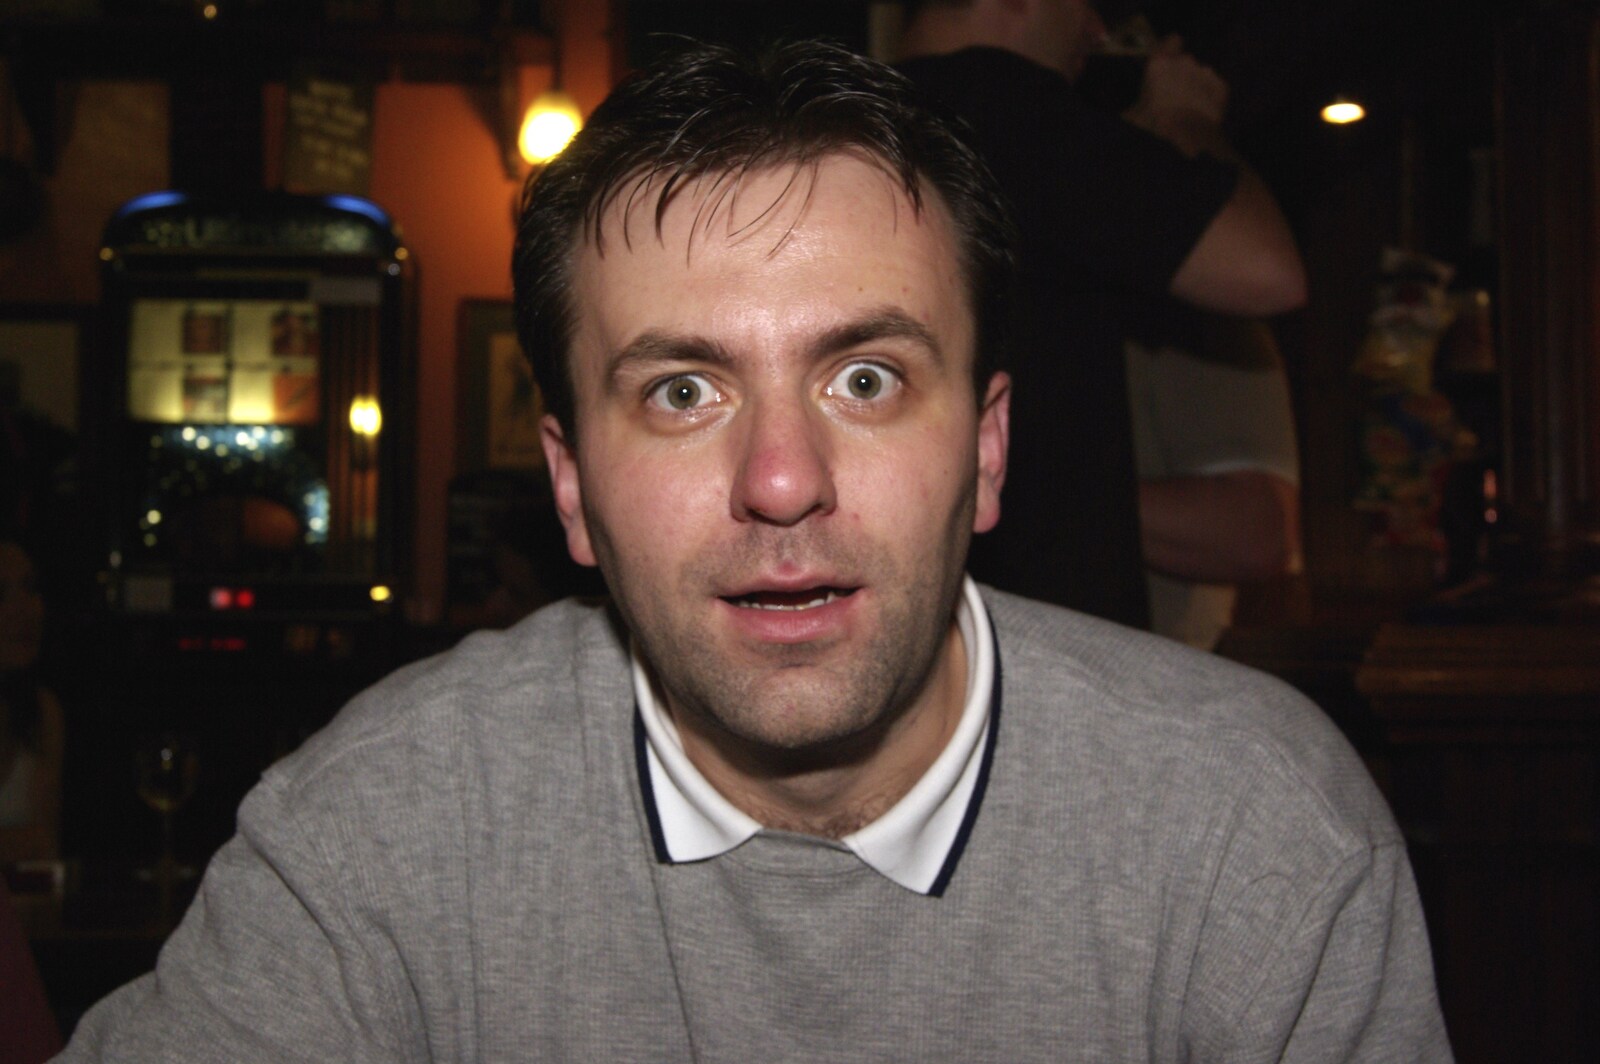 Liviu is surprised from Beer and Kebabs: Leaving "The Lab", Mill Road, Cambridge - 12th January 2007